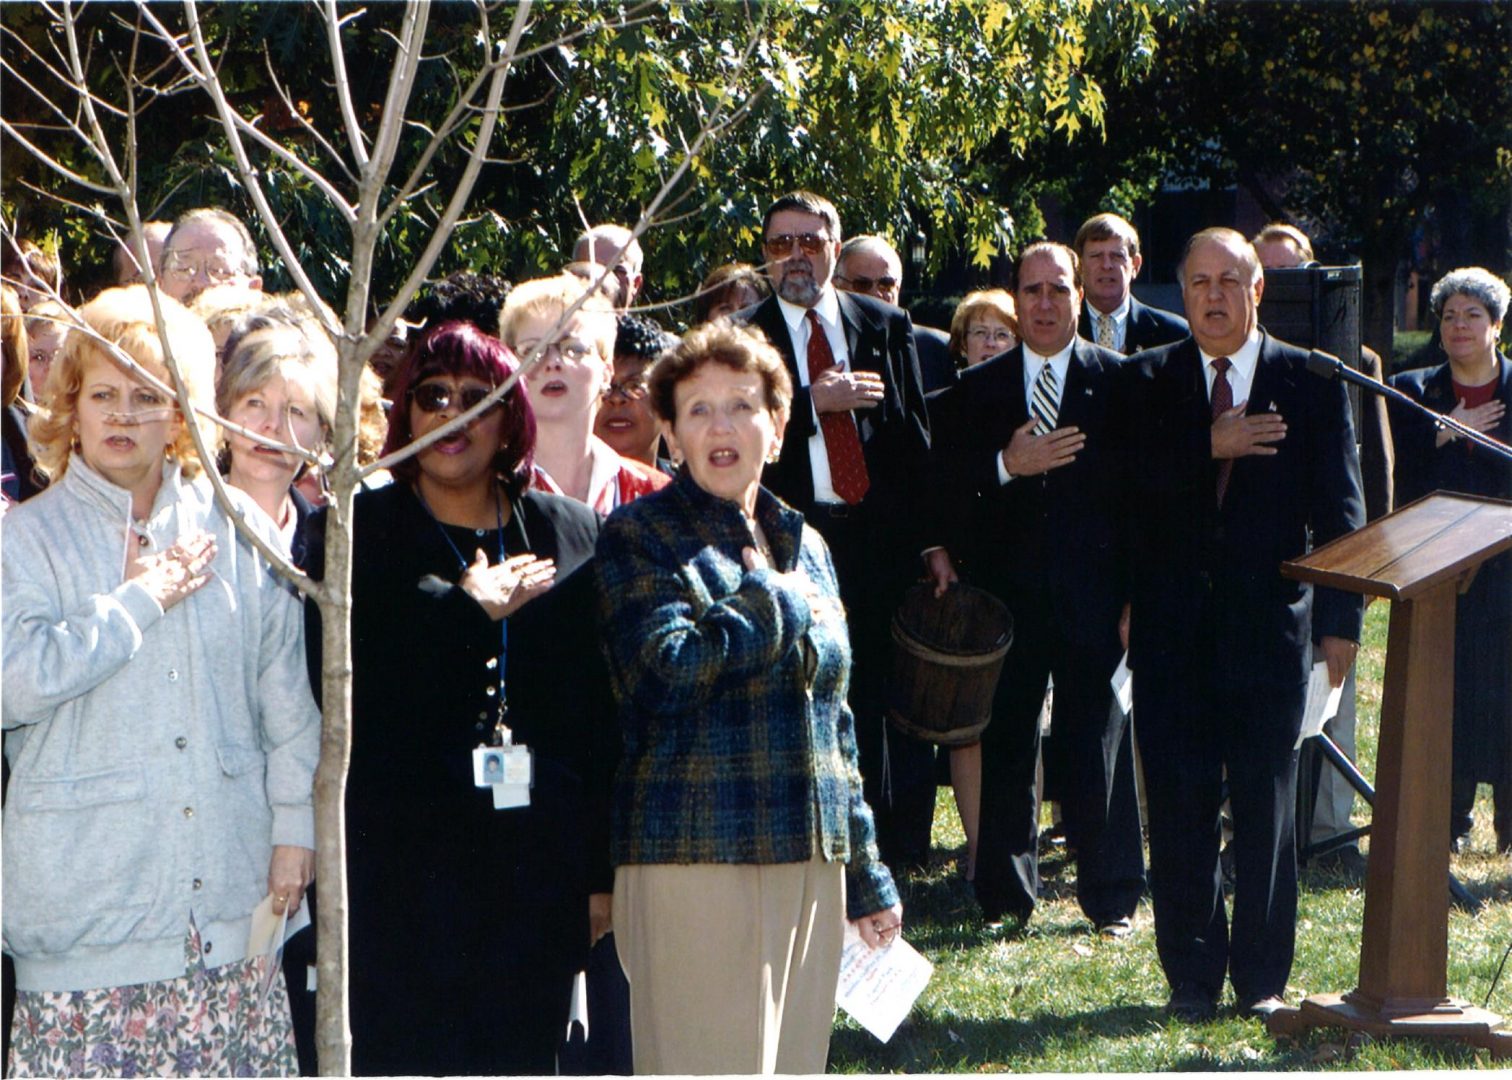 State lawmakers sing a patriotic hymn after a tree is planted on the state Capitol grounds honoring the victims of United Airlines Flight 93 on Oct. 29, 2001. The plane was hijacked by four terrorists on Sept. 11, 2001 and crashed after passengers and crew attempted to retake the cockpit. At center in dark sunglasses, former Rep. Bob Bastian (R-Somerset) who represented the district where Flight 93 crashed. 